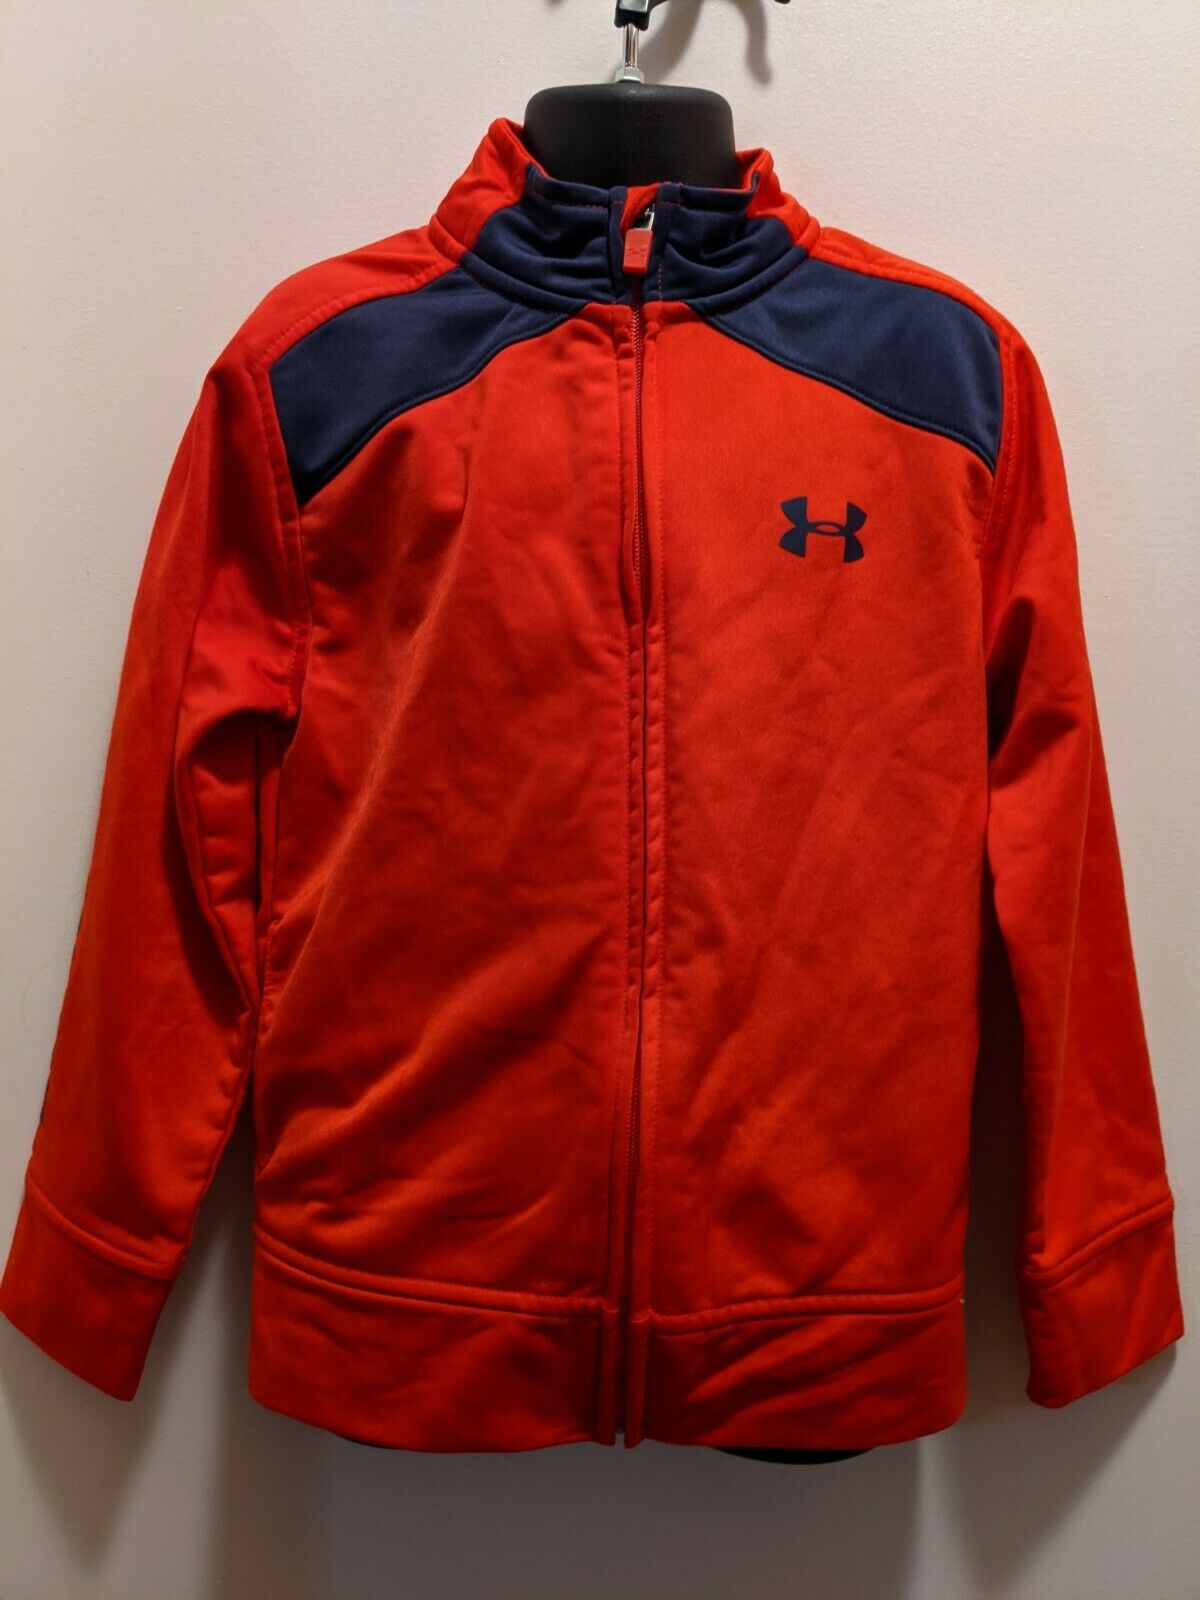 Under Armour Kids 5 Red Polyester Zip Up Jacket